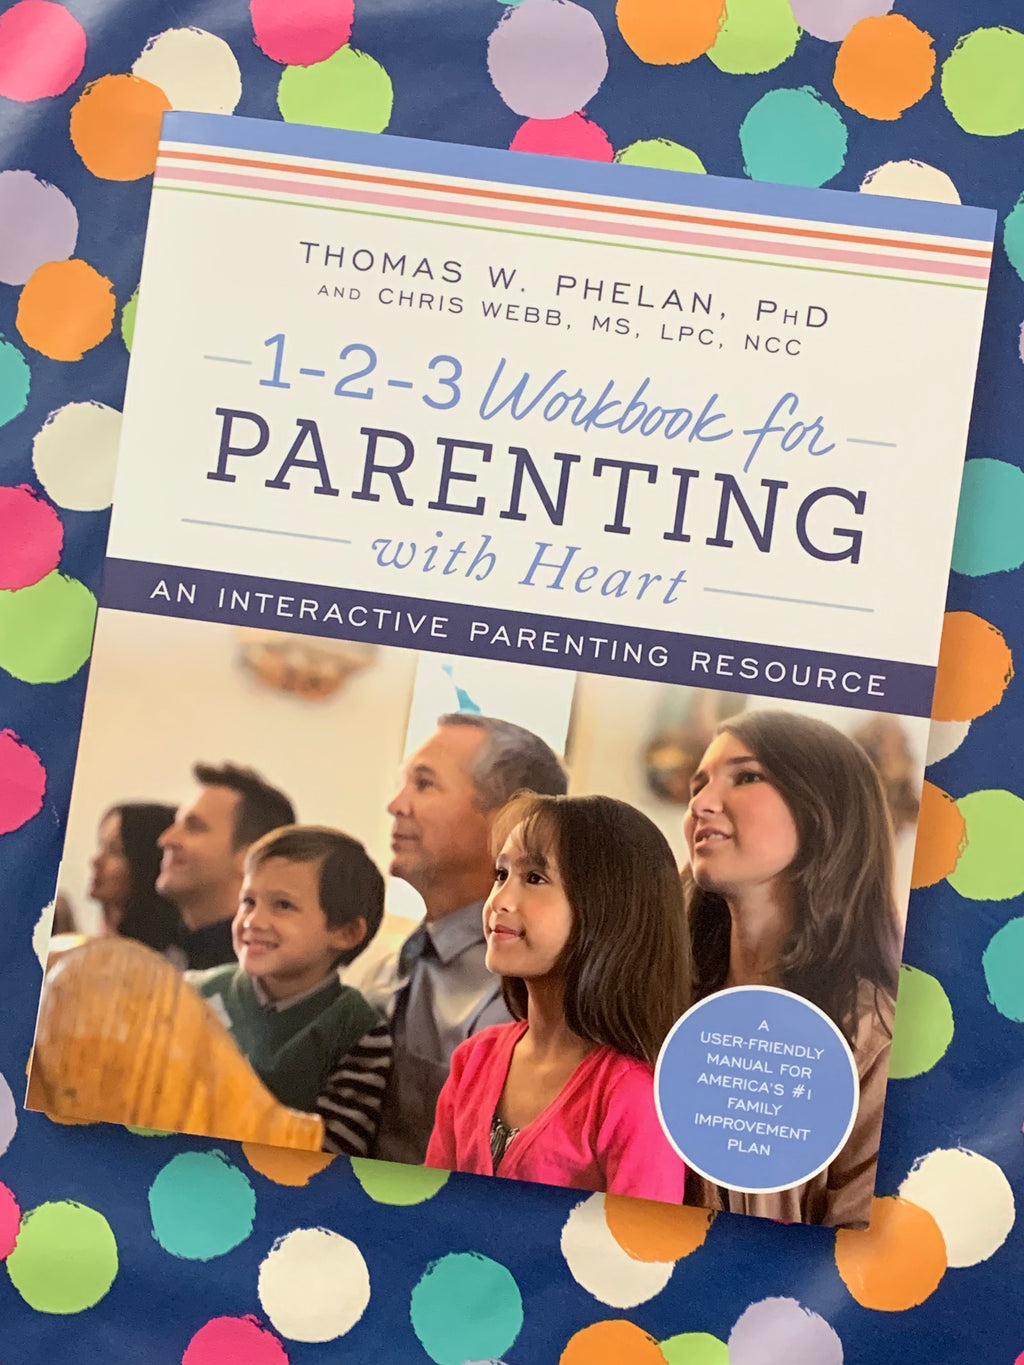 1-2-3 Workbook for Parenting with Heart- By Thomas W. Phelan, PhD and Chris Webb, MS, LPC, NCC